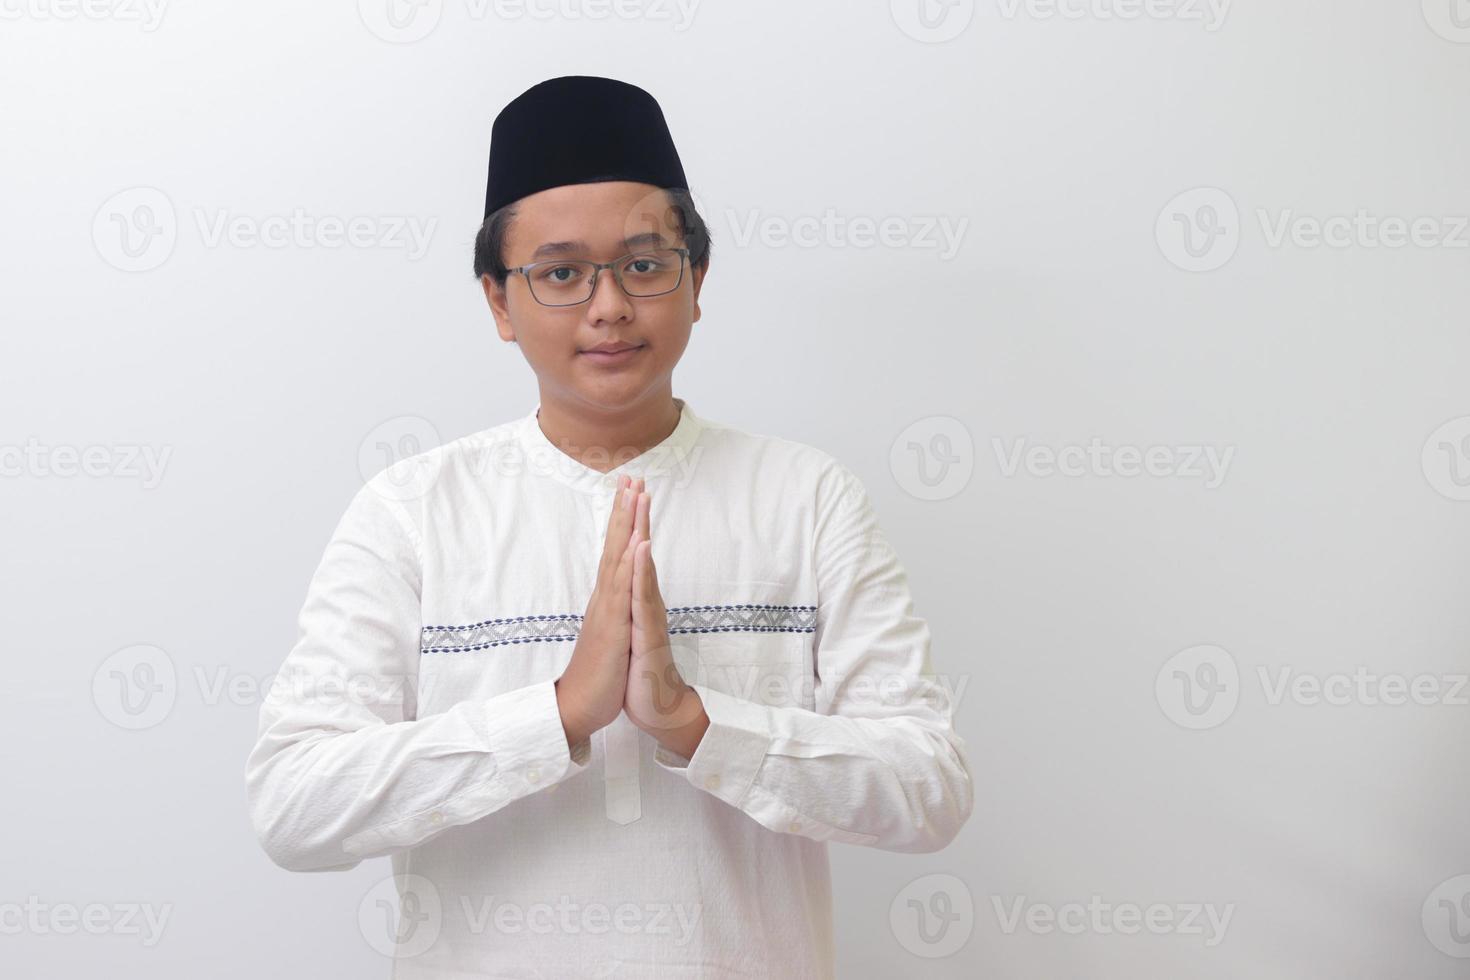 Portrait of young Asian muslim man showing apologize and welcome hand gesture. Isolated image on white background photo